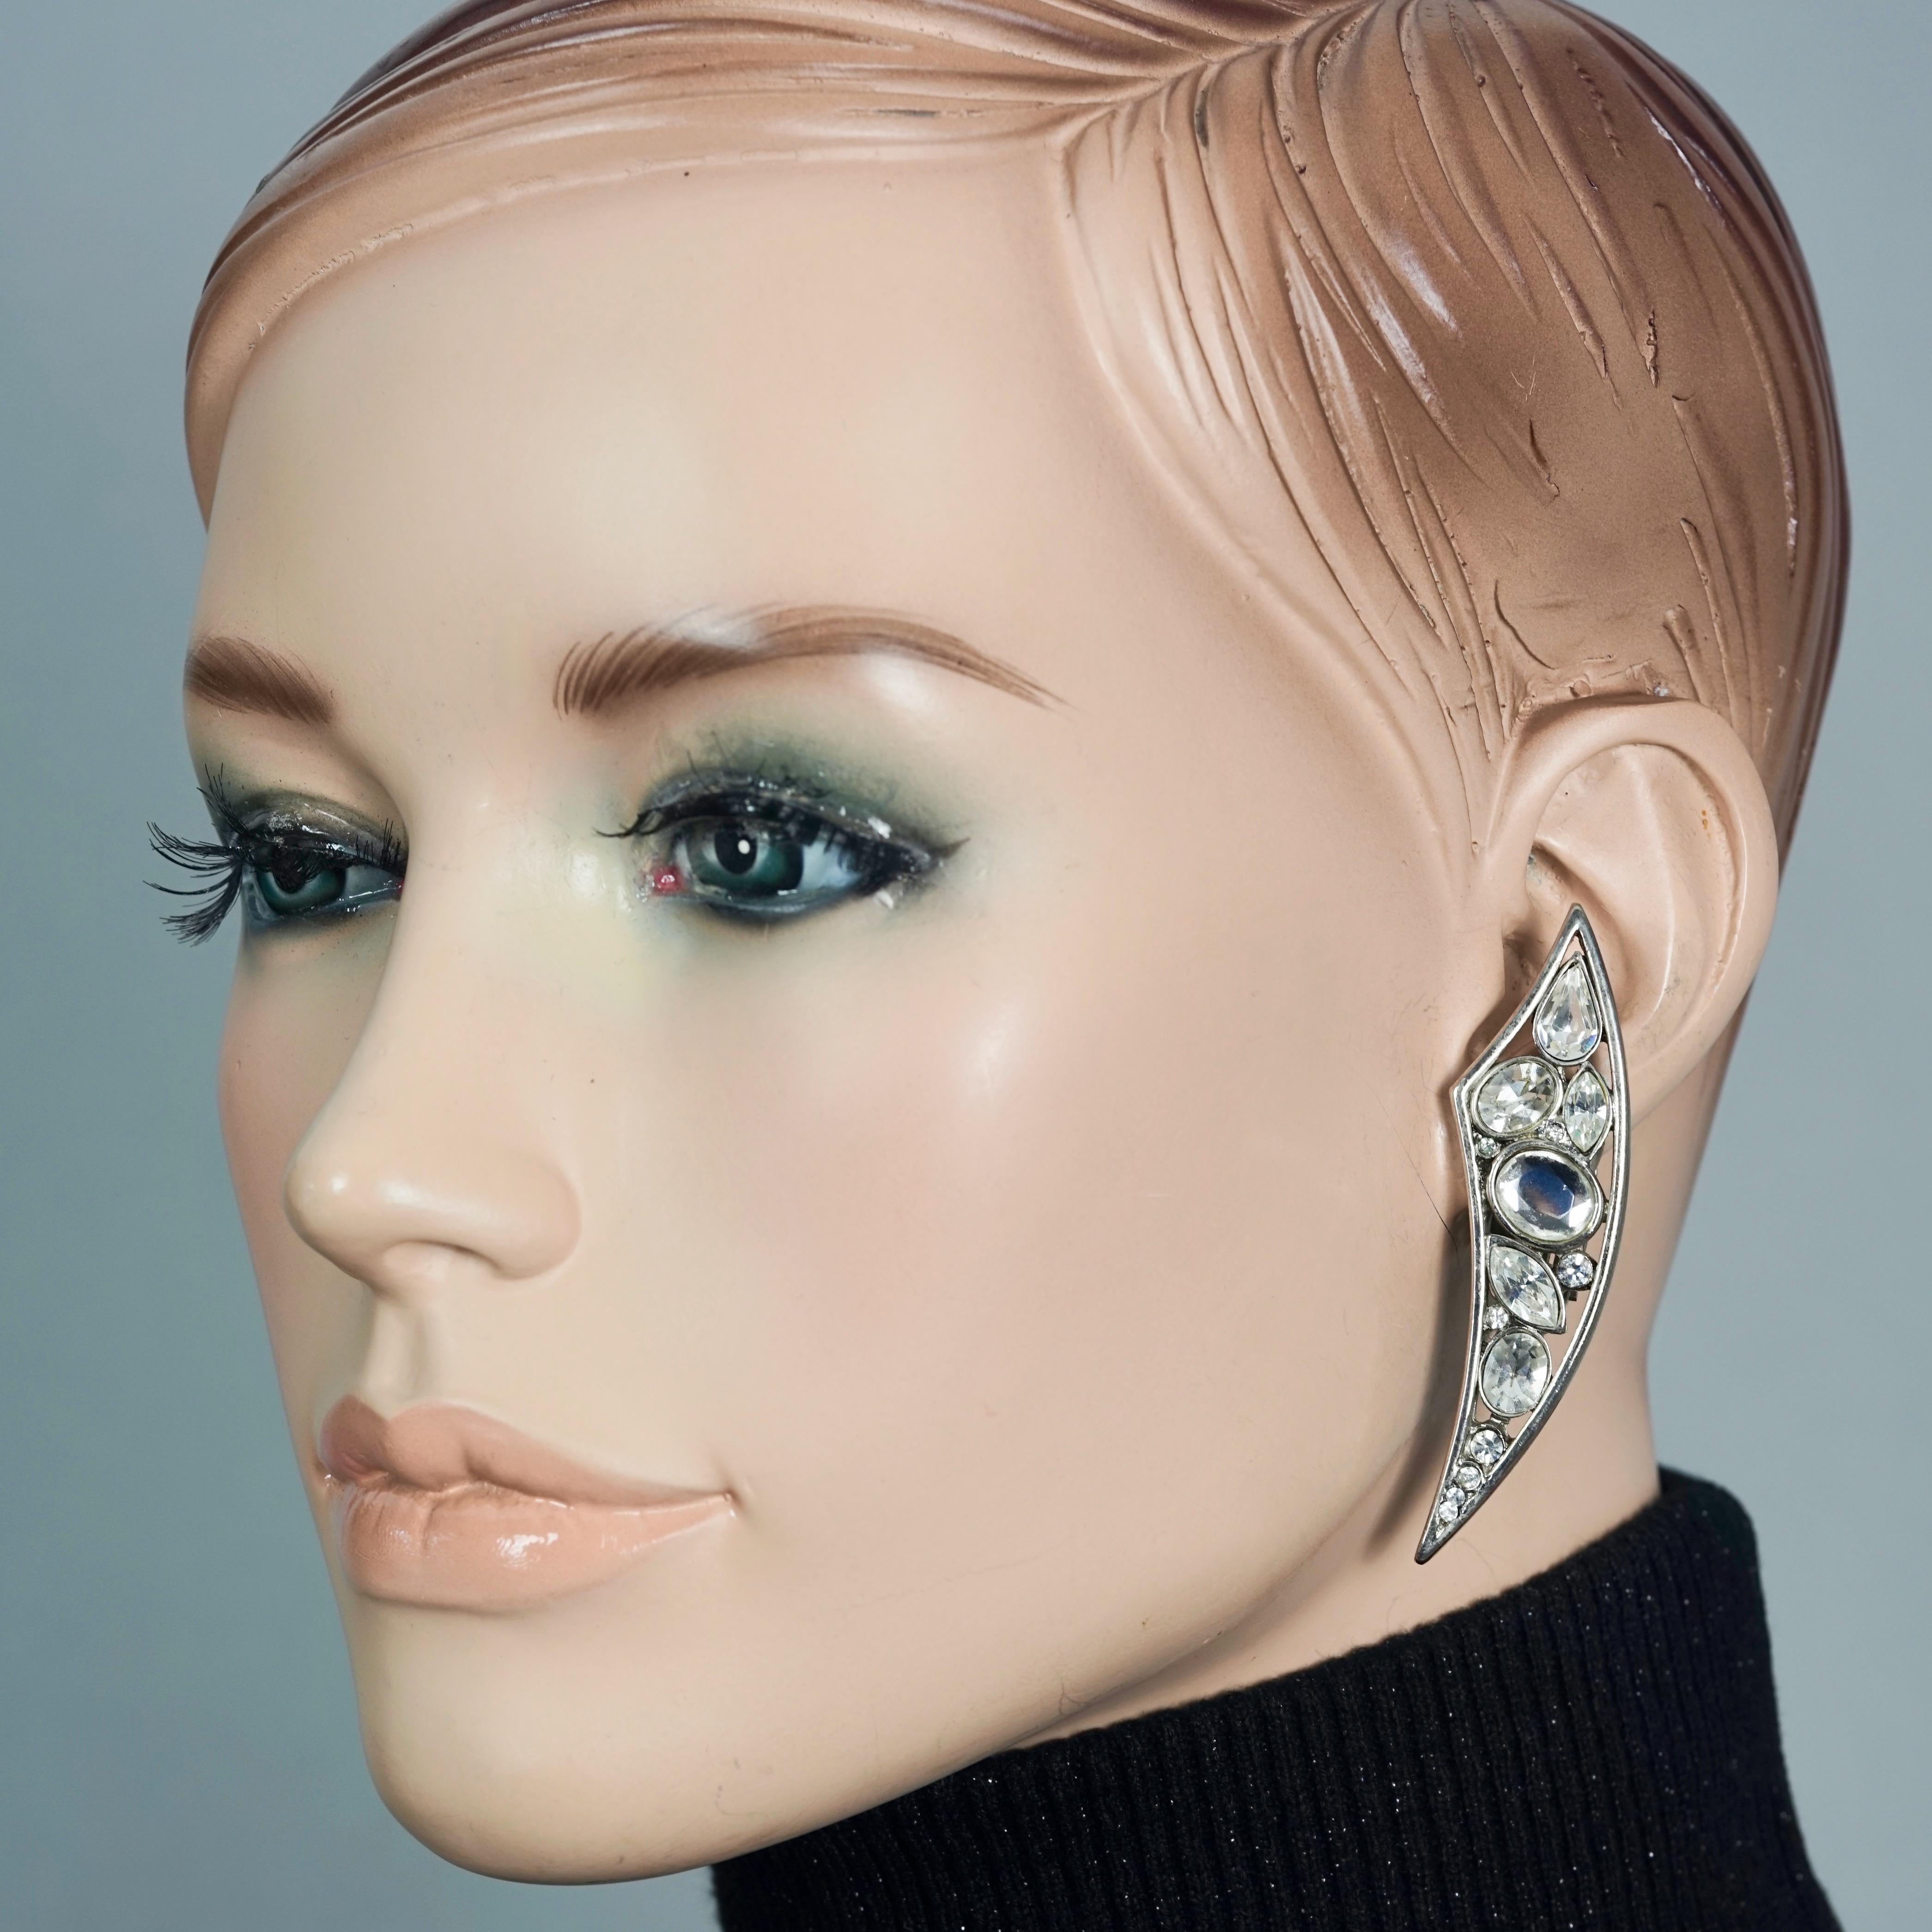 Vintage Massive SCHERRER PARIS Rhinestone Studded Pointed Earrings

Measurements:
Length: 2.36 inches (6.6 cm)
Width: 0.79 inch (2 cm)
Weight per Earring: 13 grams

Features:
- 100% Authentic SCHERRER PARIS.
- Pointed earrings studded with clear